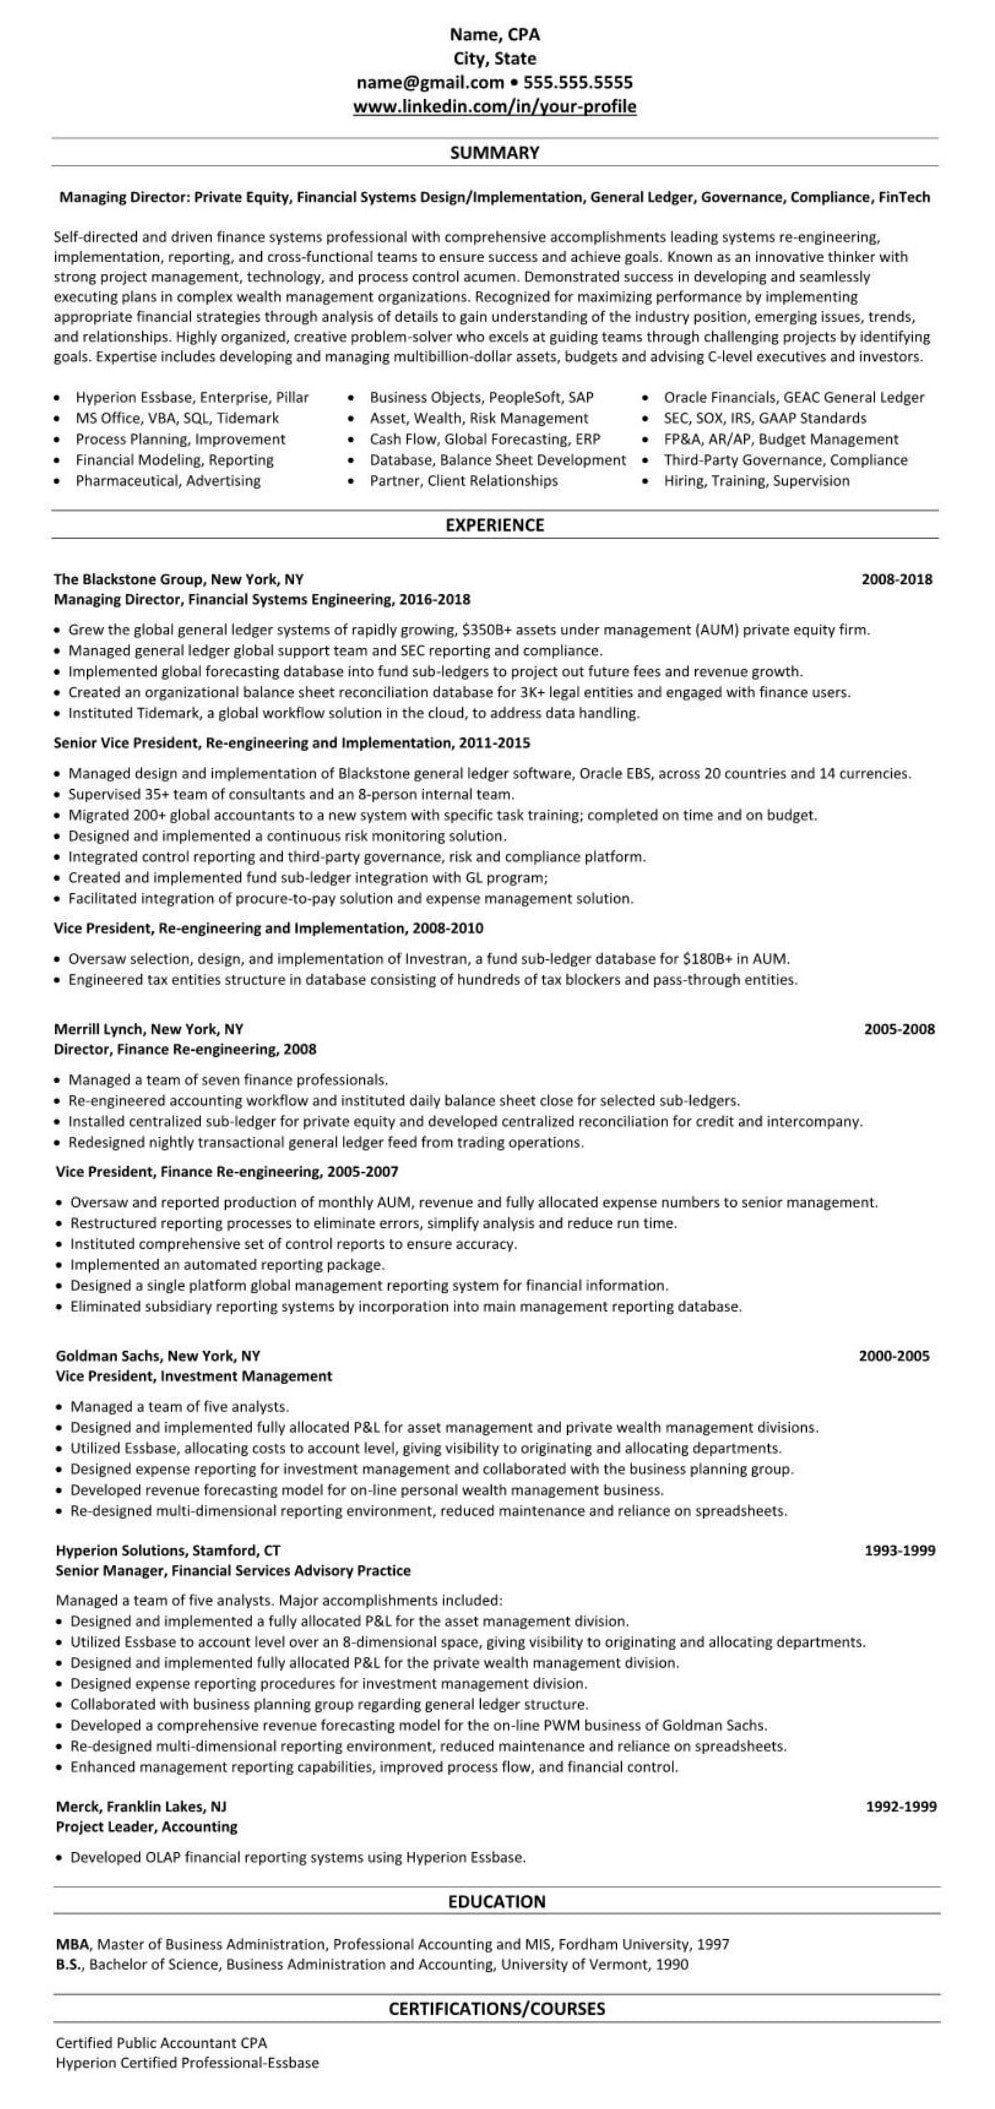 Private Equity Fund Of Funds associate Sample Resume Sample Linkedin Profile & Resume: Private Equity Venture Capital